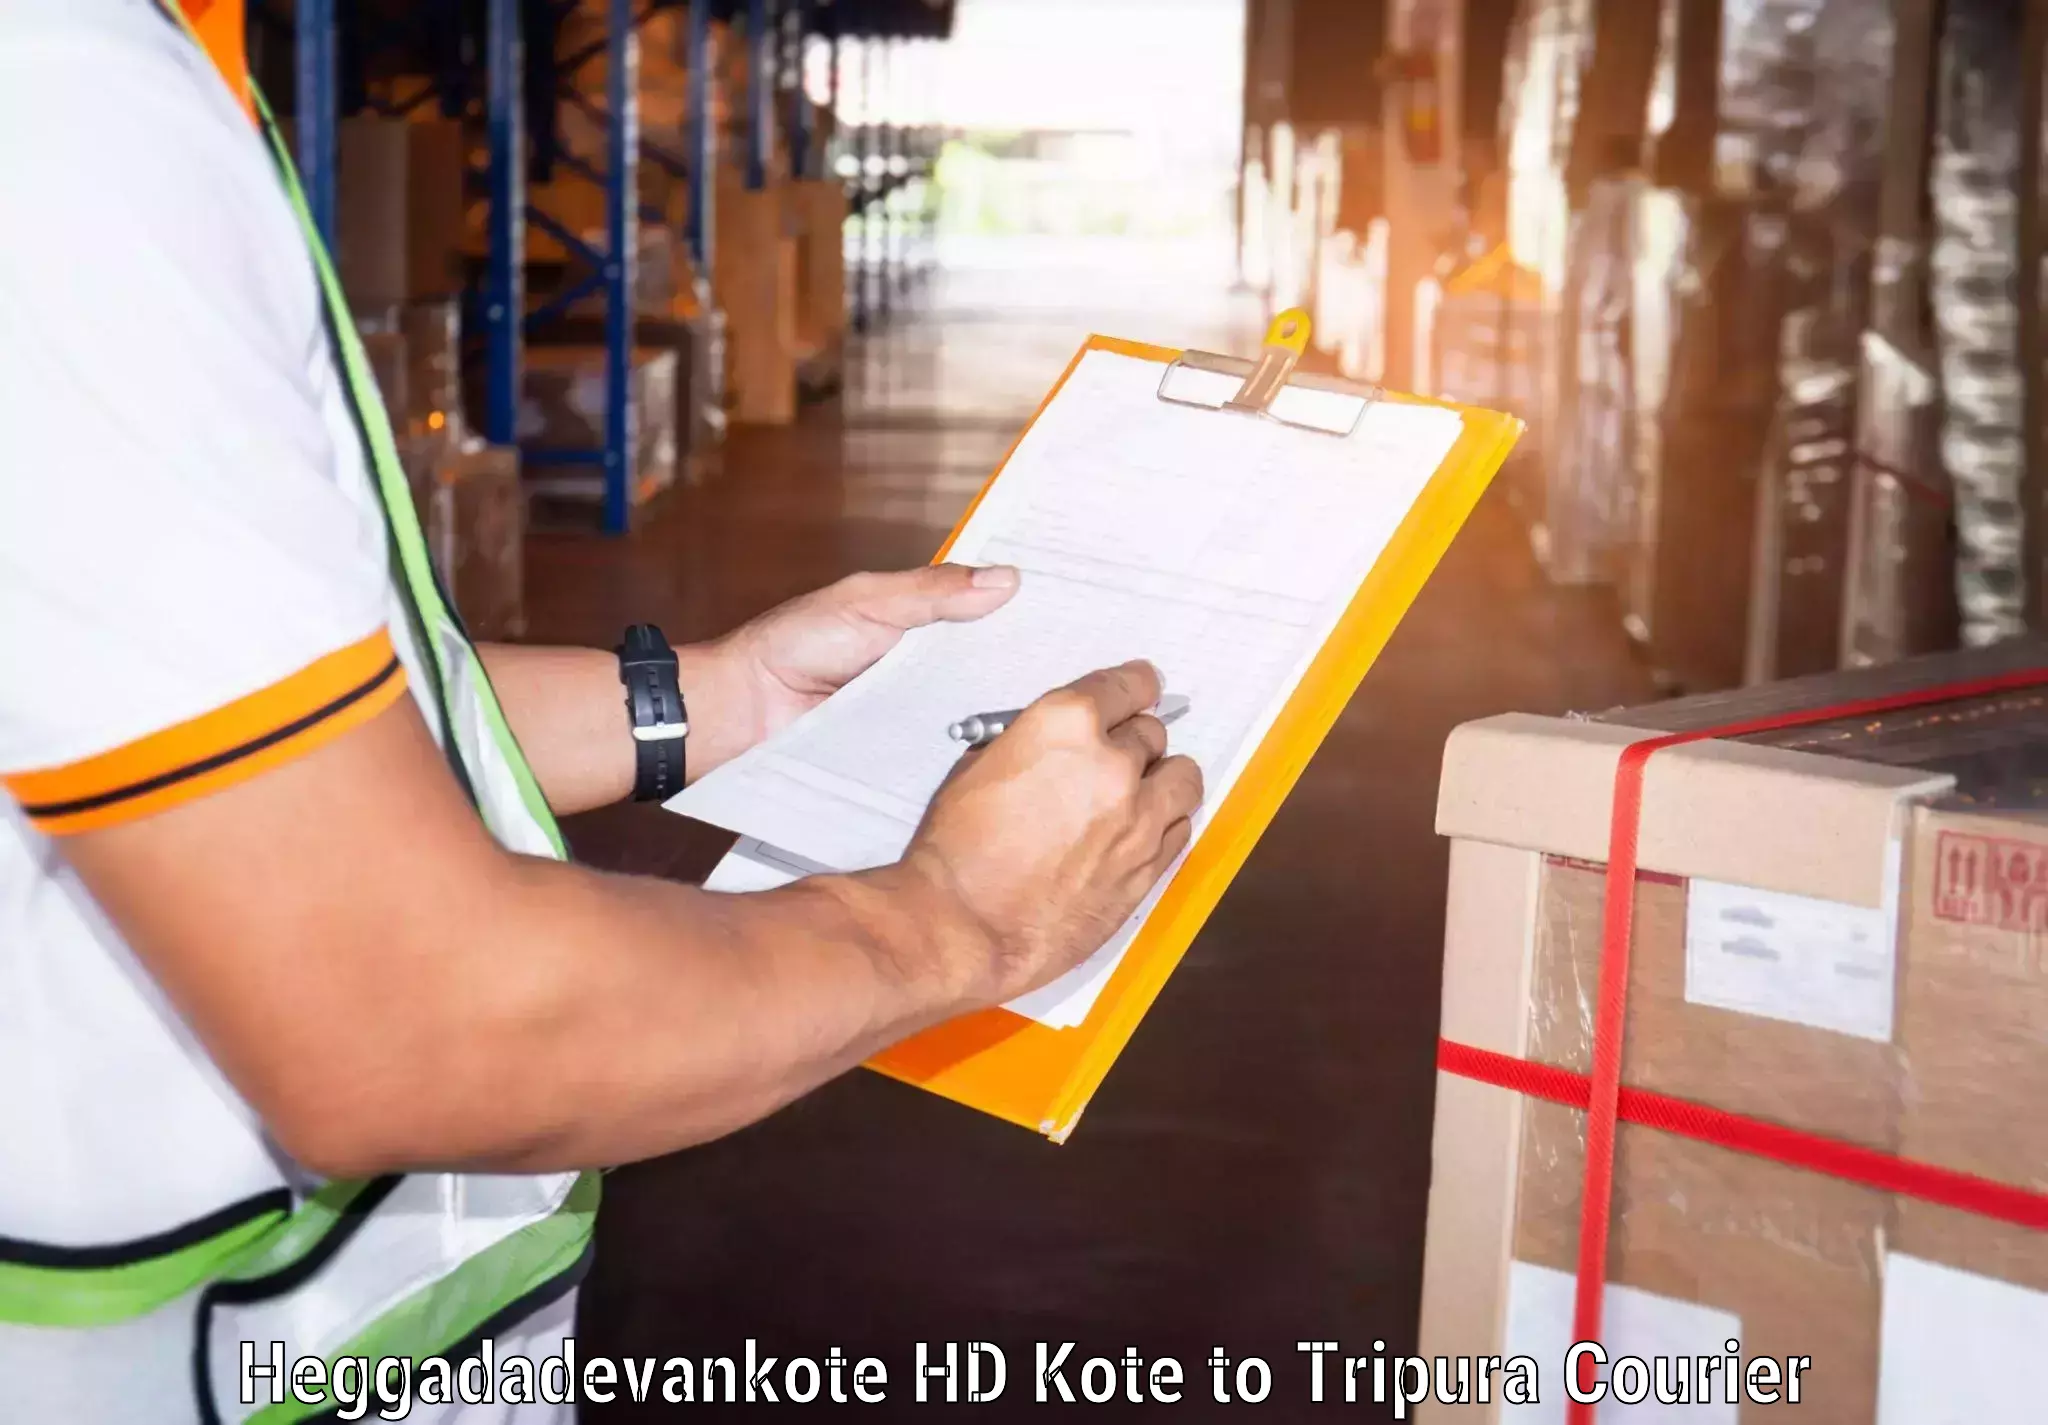 State-of-the-art courier technology Heggadadevankote HD Kote to Udaipur Tripura